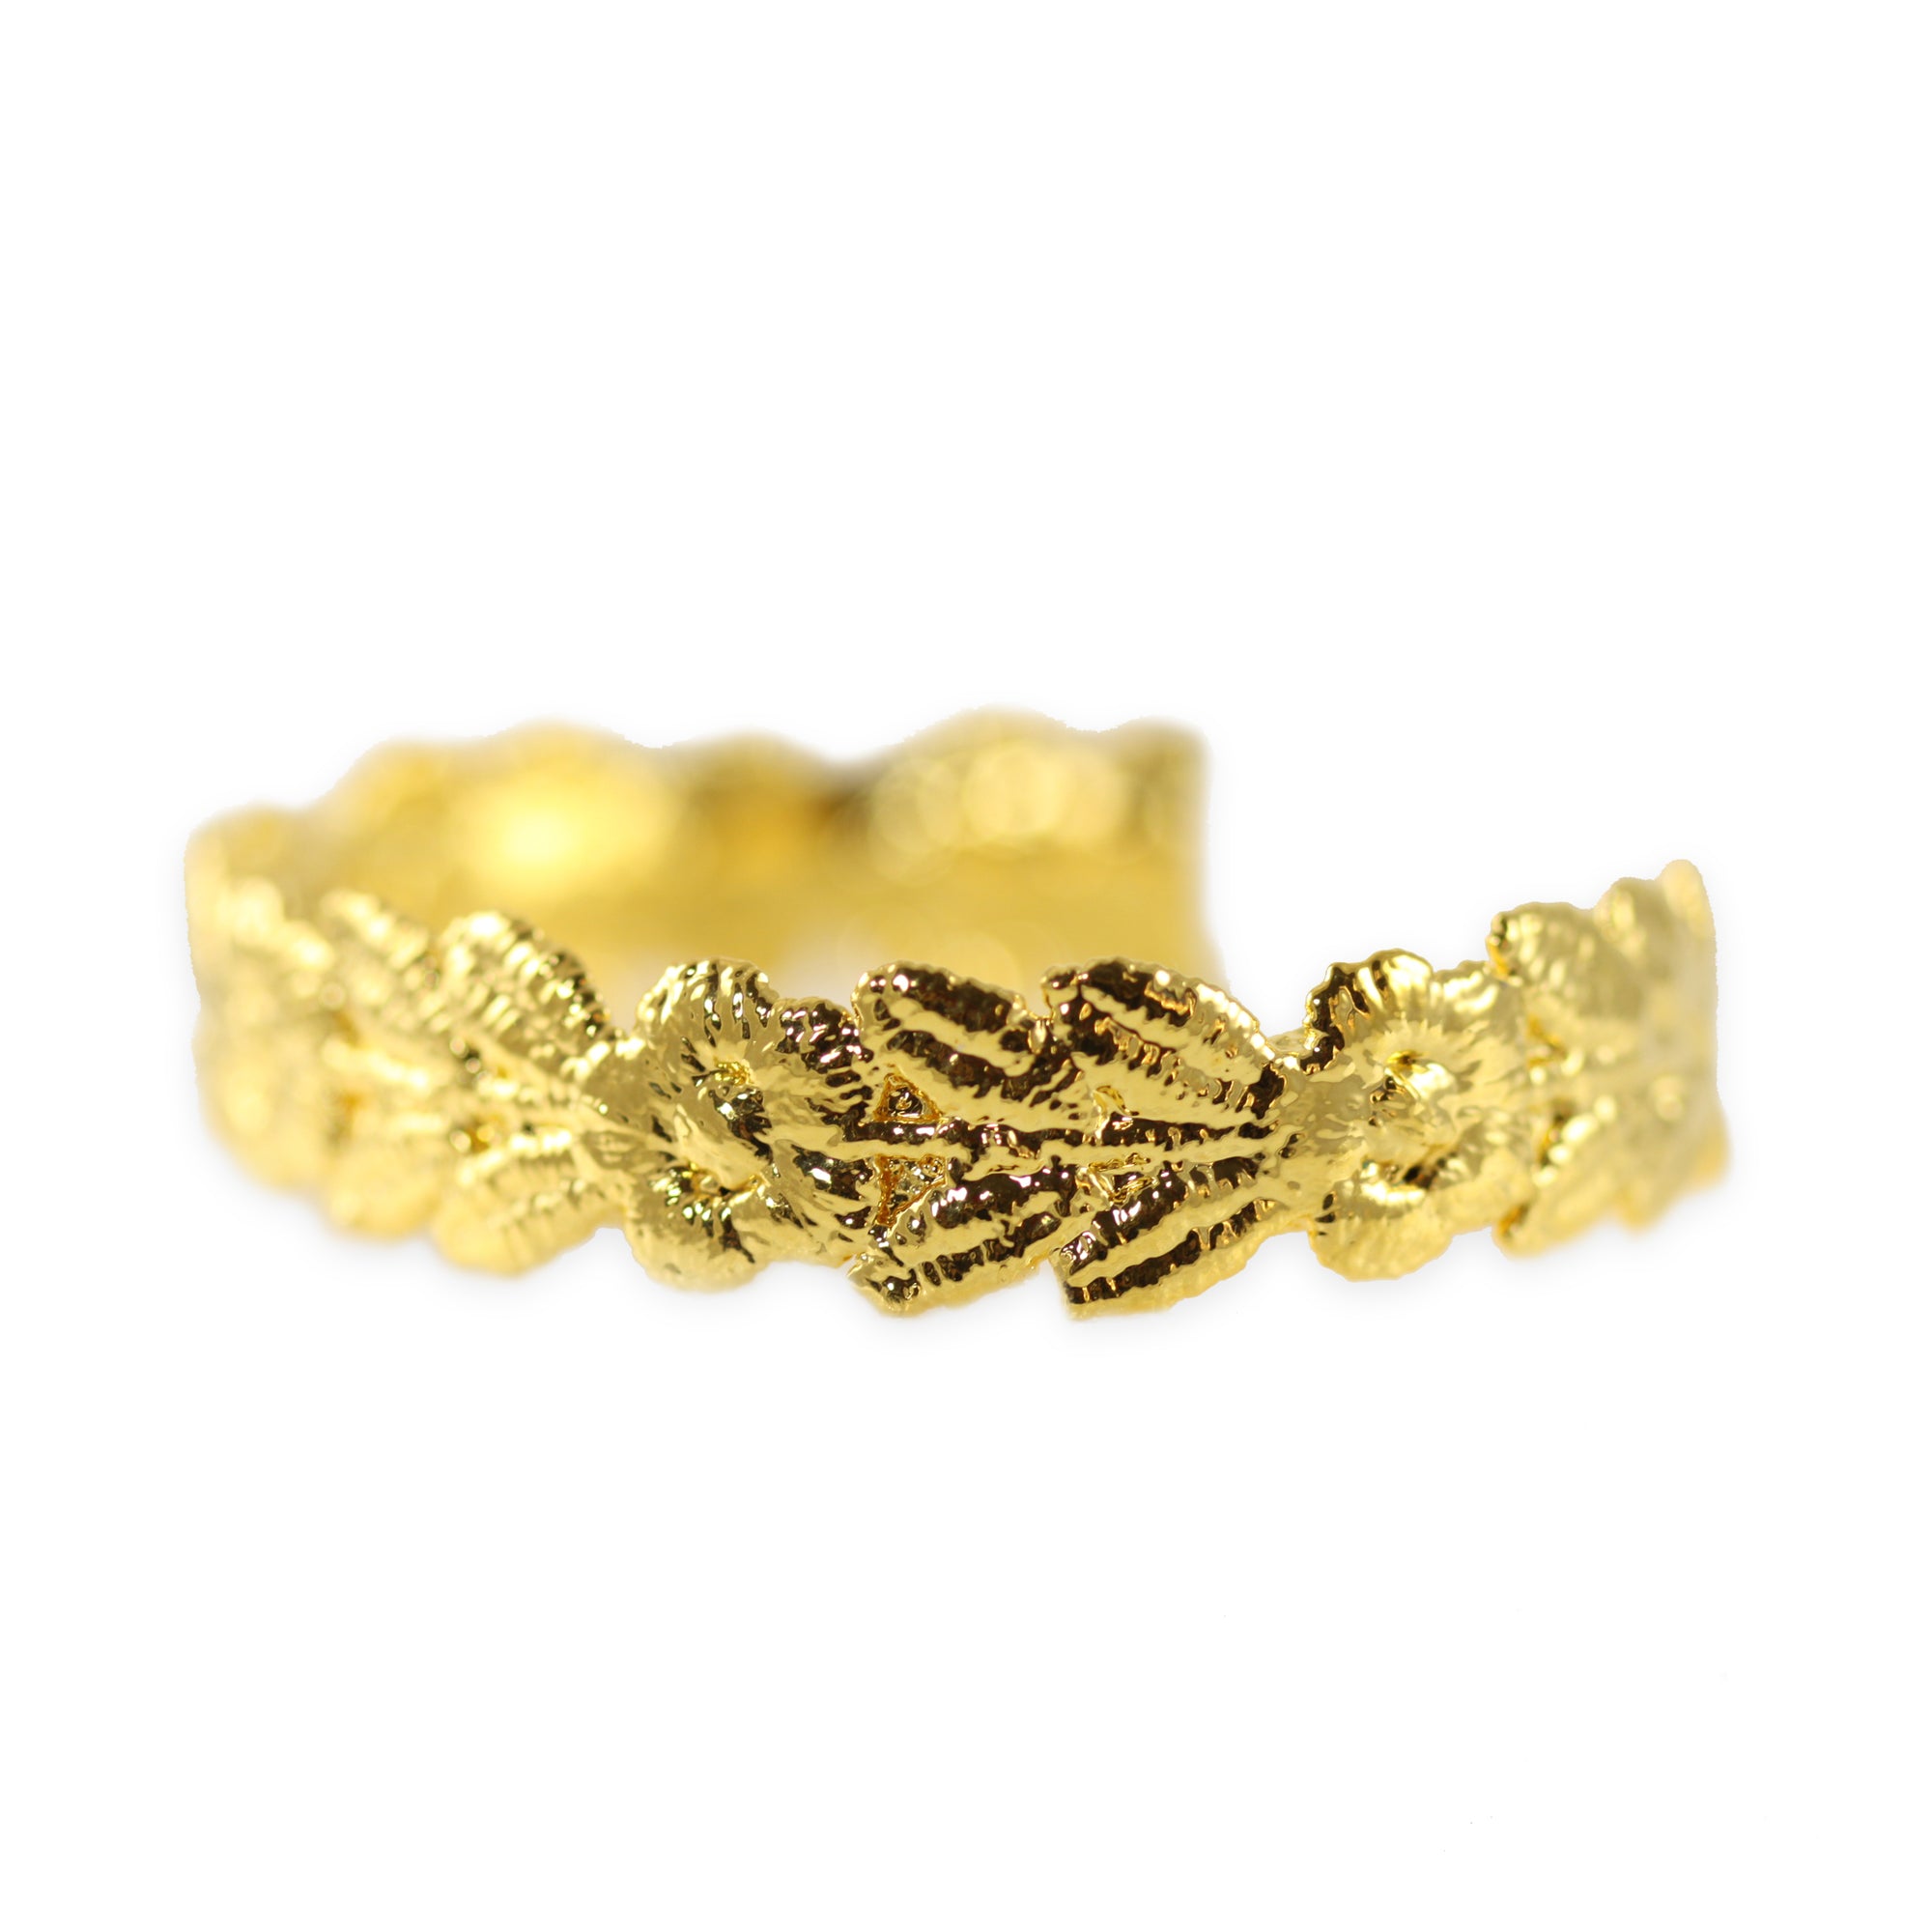 Flower garland lace bracelet dipped in 24k gold, signed and numbered in the back.